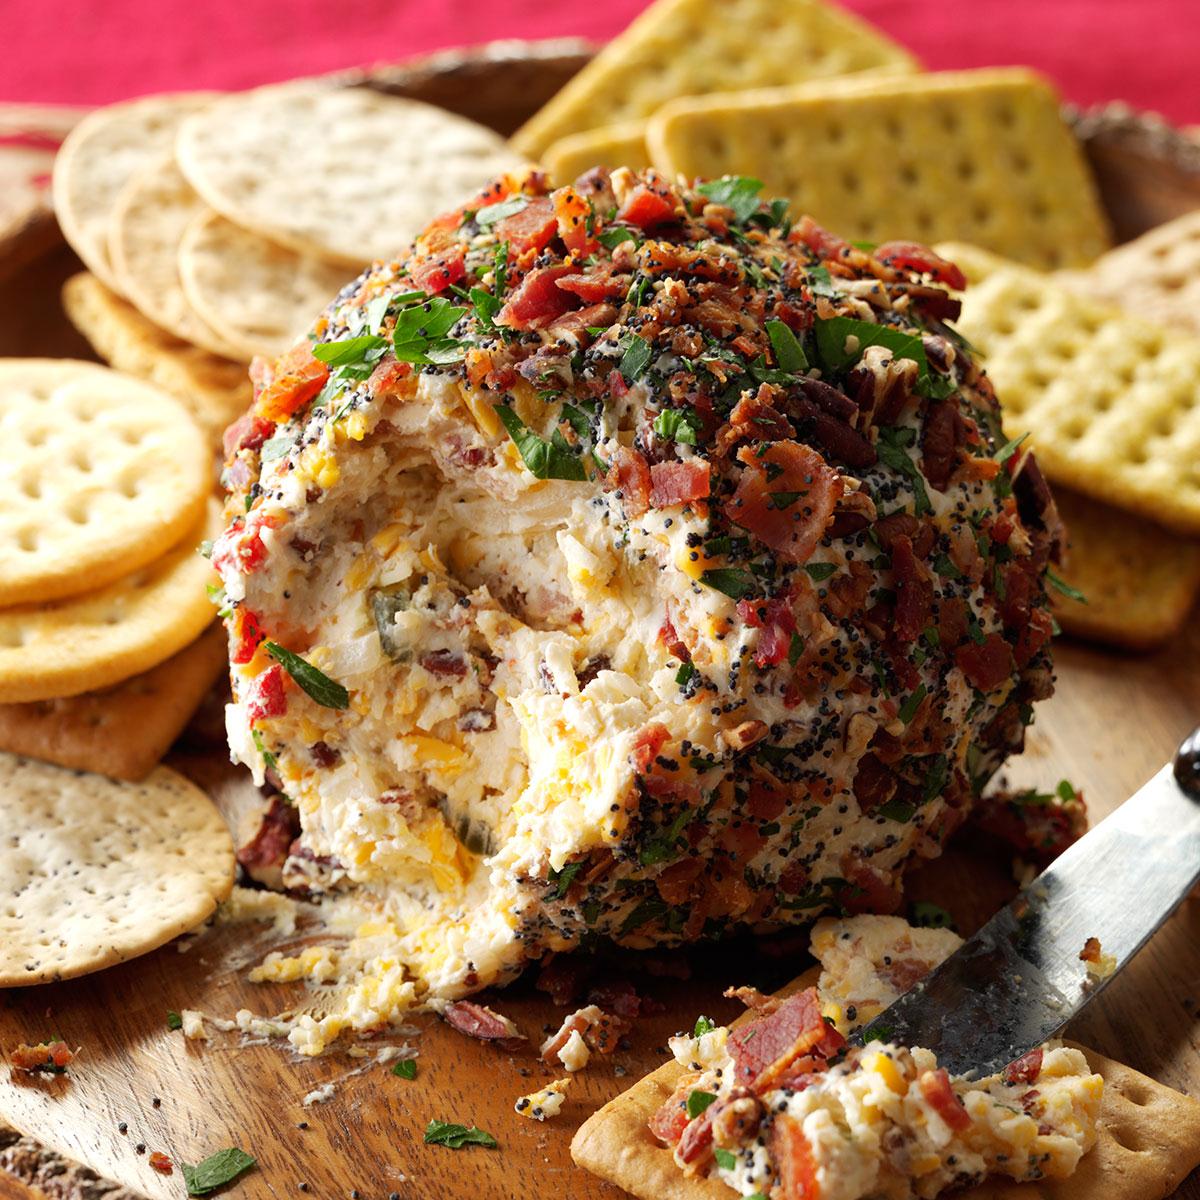 Bacon, Cheddar And Swiss Cheese Ball Recipe: How To Make It